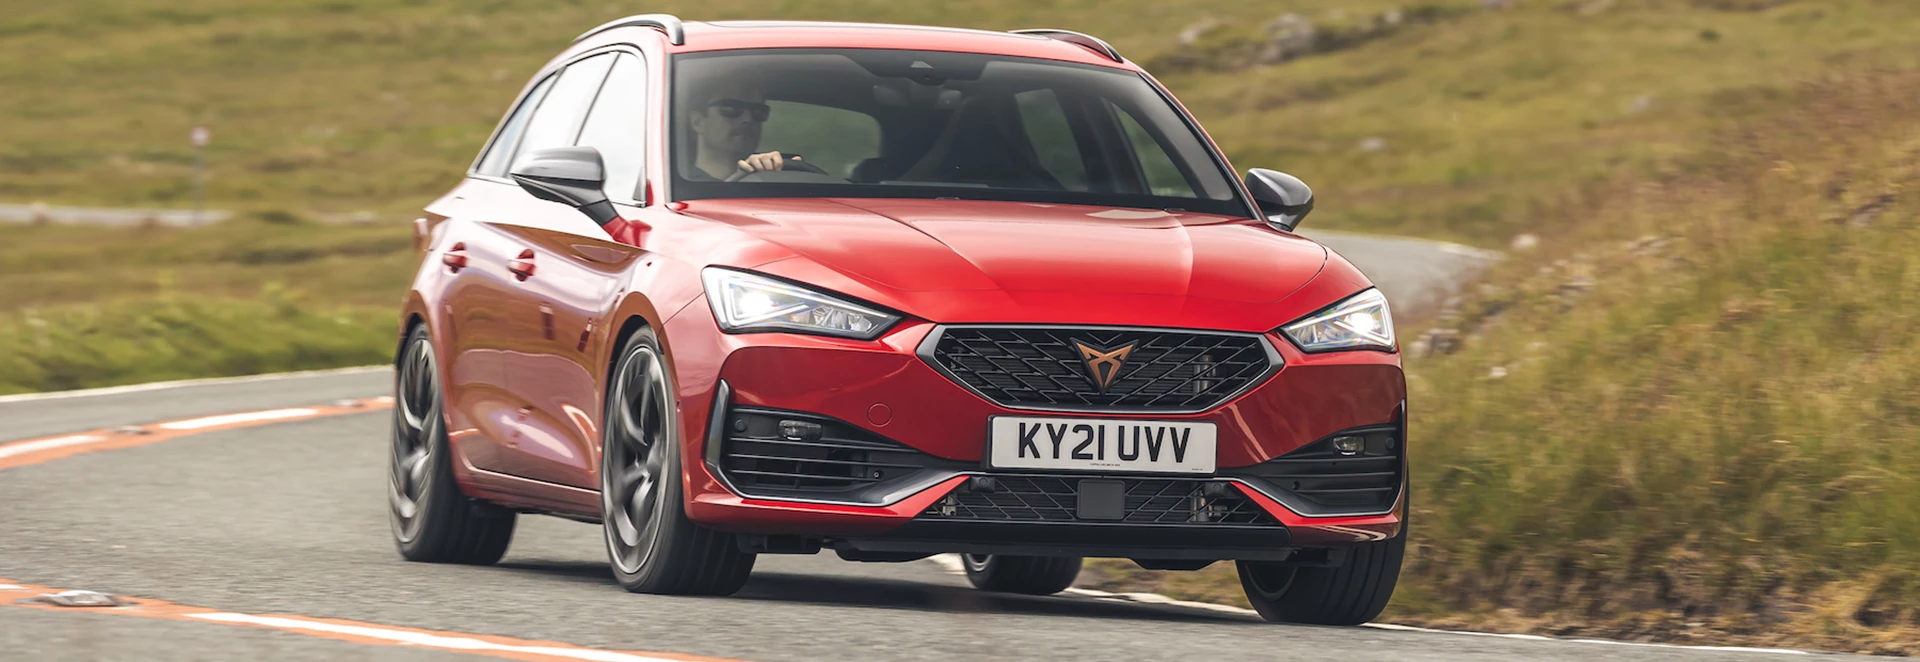 Cupra Leon scores top marks in latest Euro NCAP safety tests 